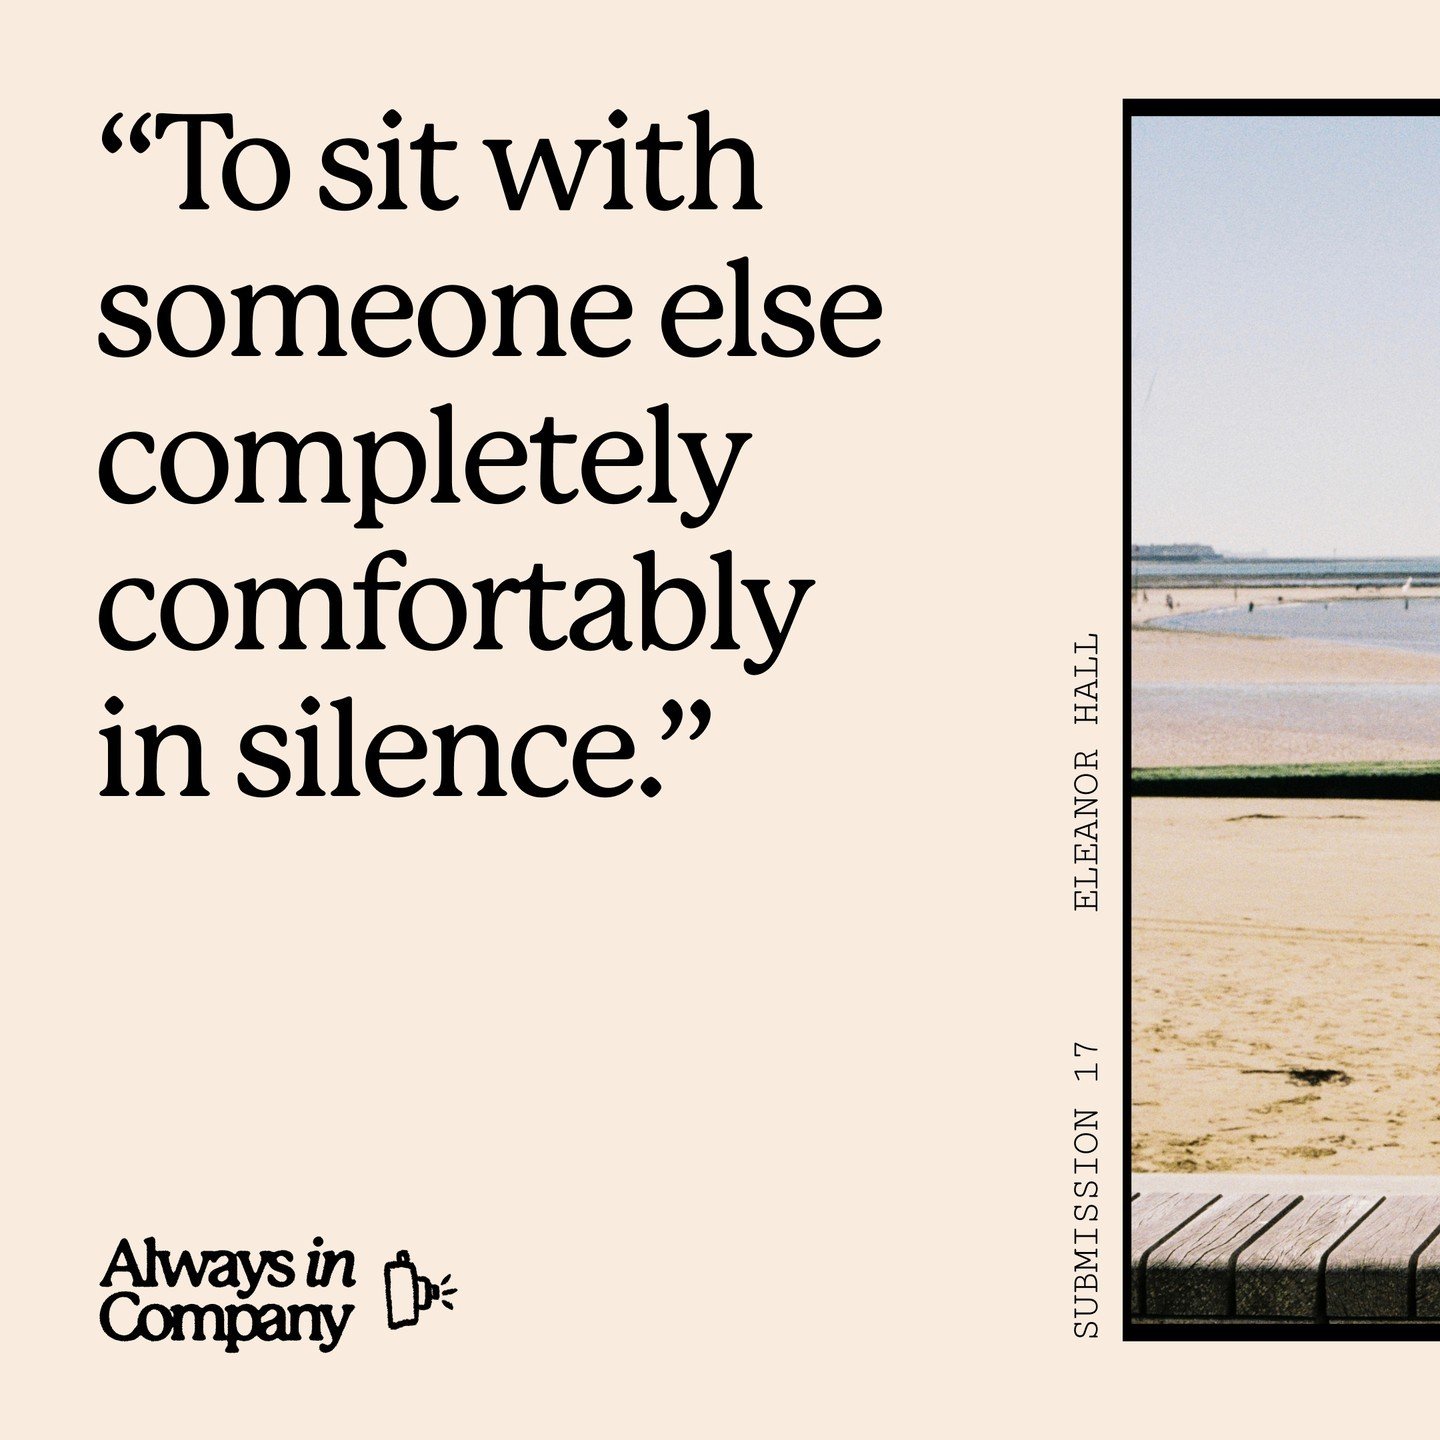 We are excited to start sharing some of the brilliant submissions to our Always In Company project over the coming weeks. This submission portrays company as comfortable silence; the ability to be with someone else and feel comfortable in the silence